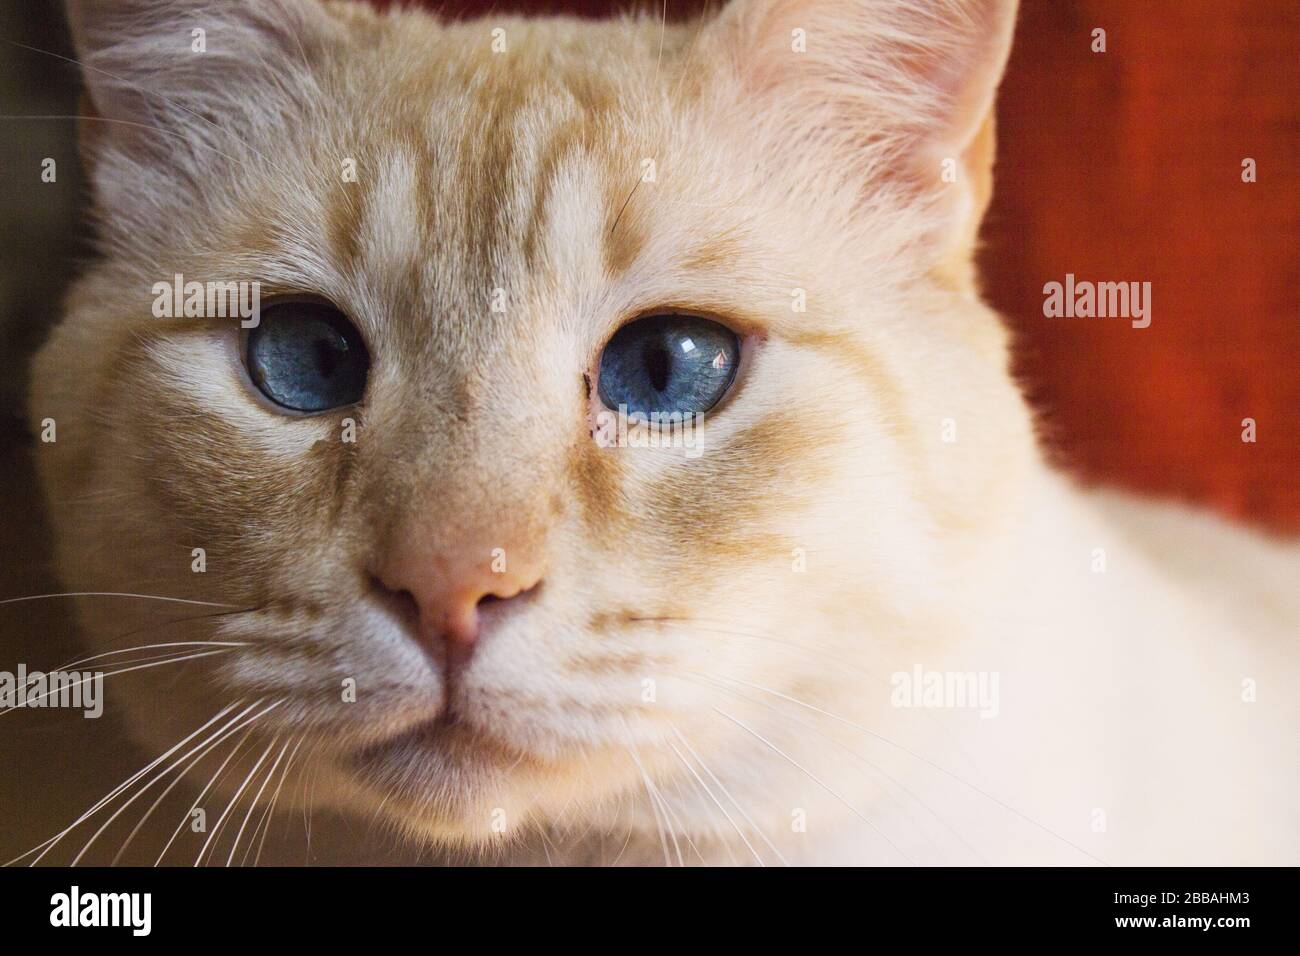 Light tan cat with blue eyes looking at 